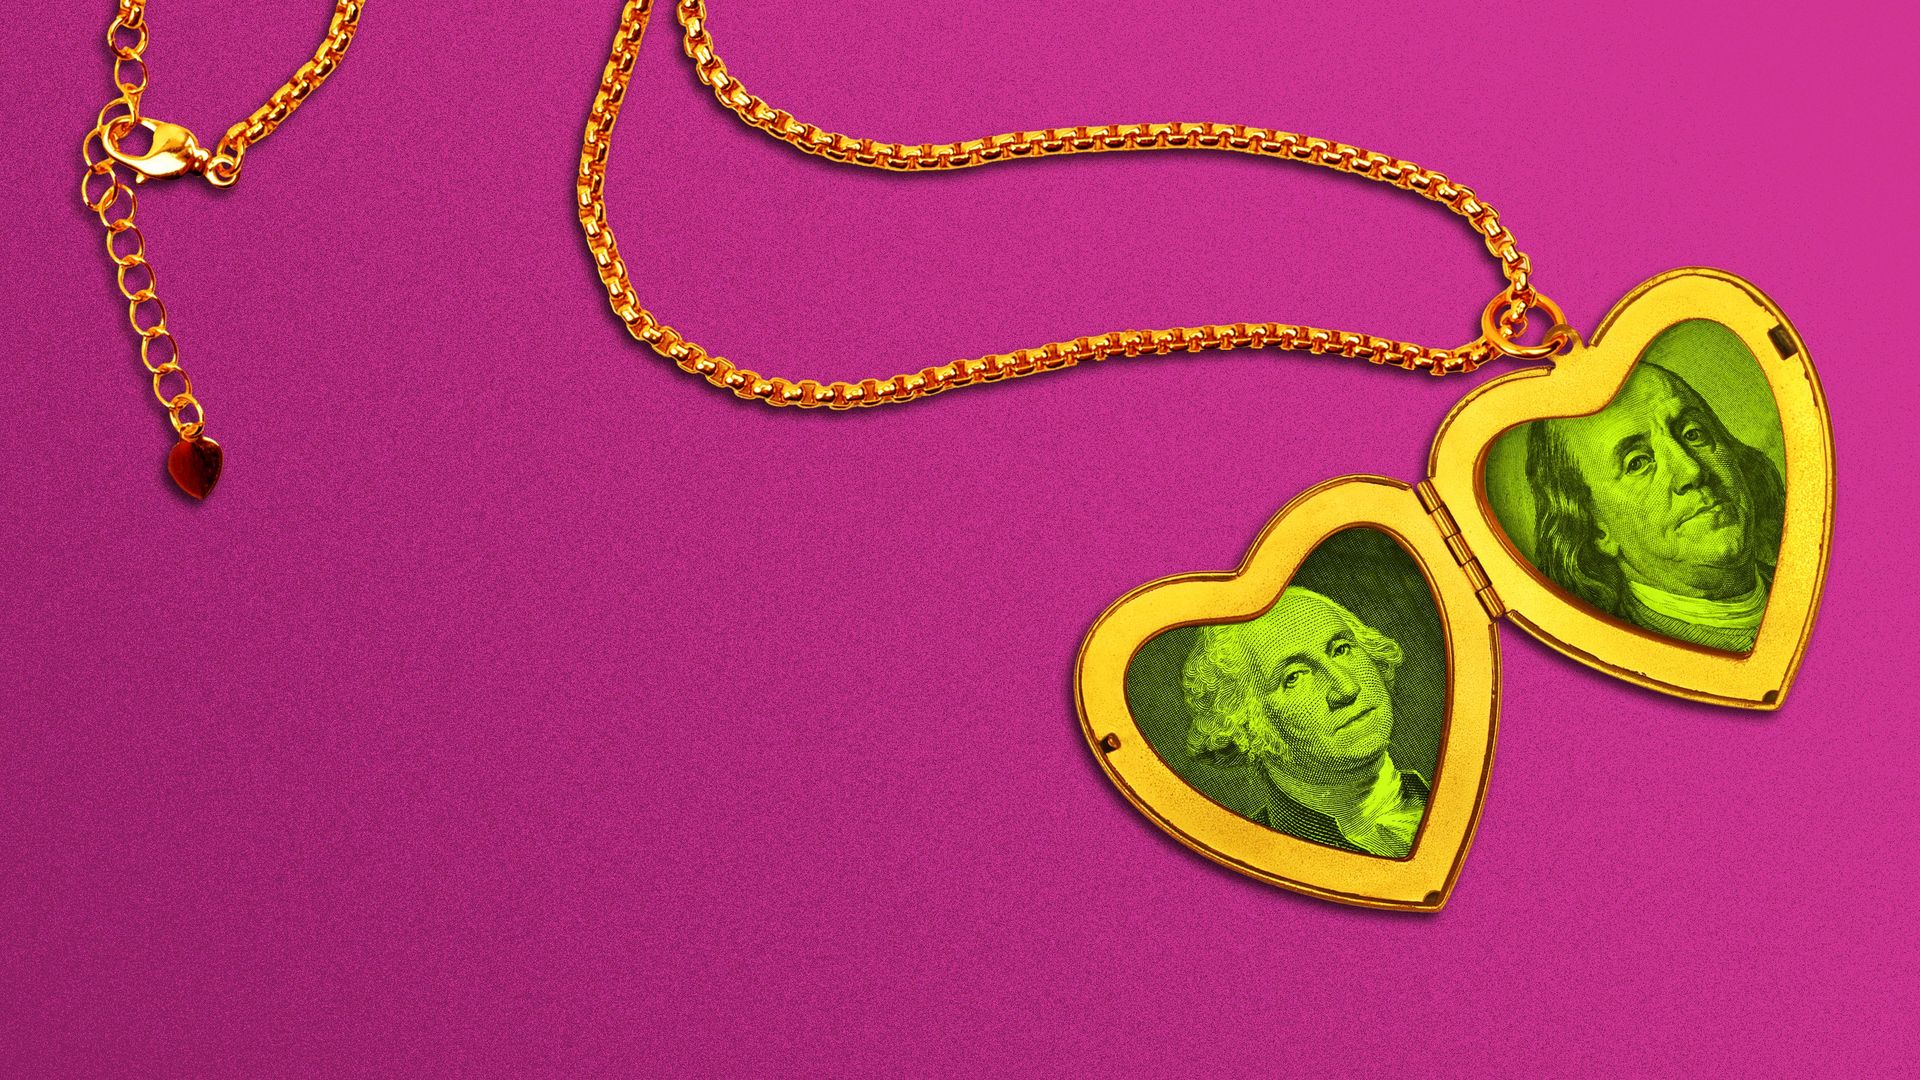 Illustration of an open heart locket with pictures of George Washington and Ben Franklin inside. 